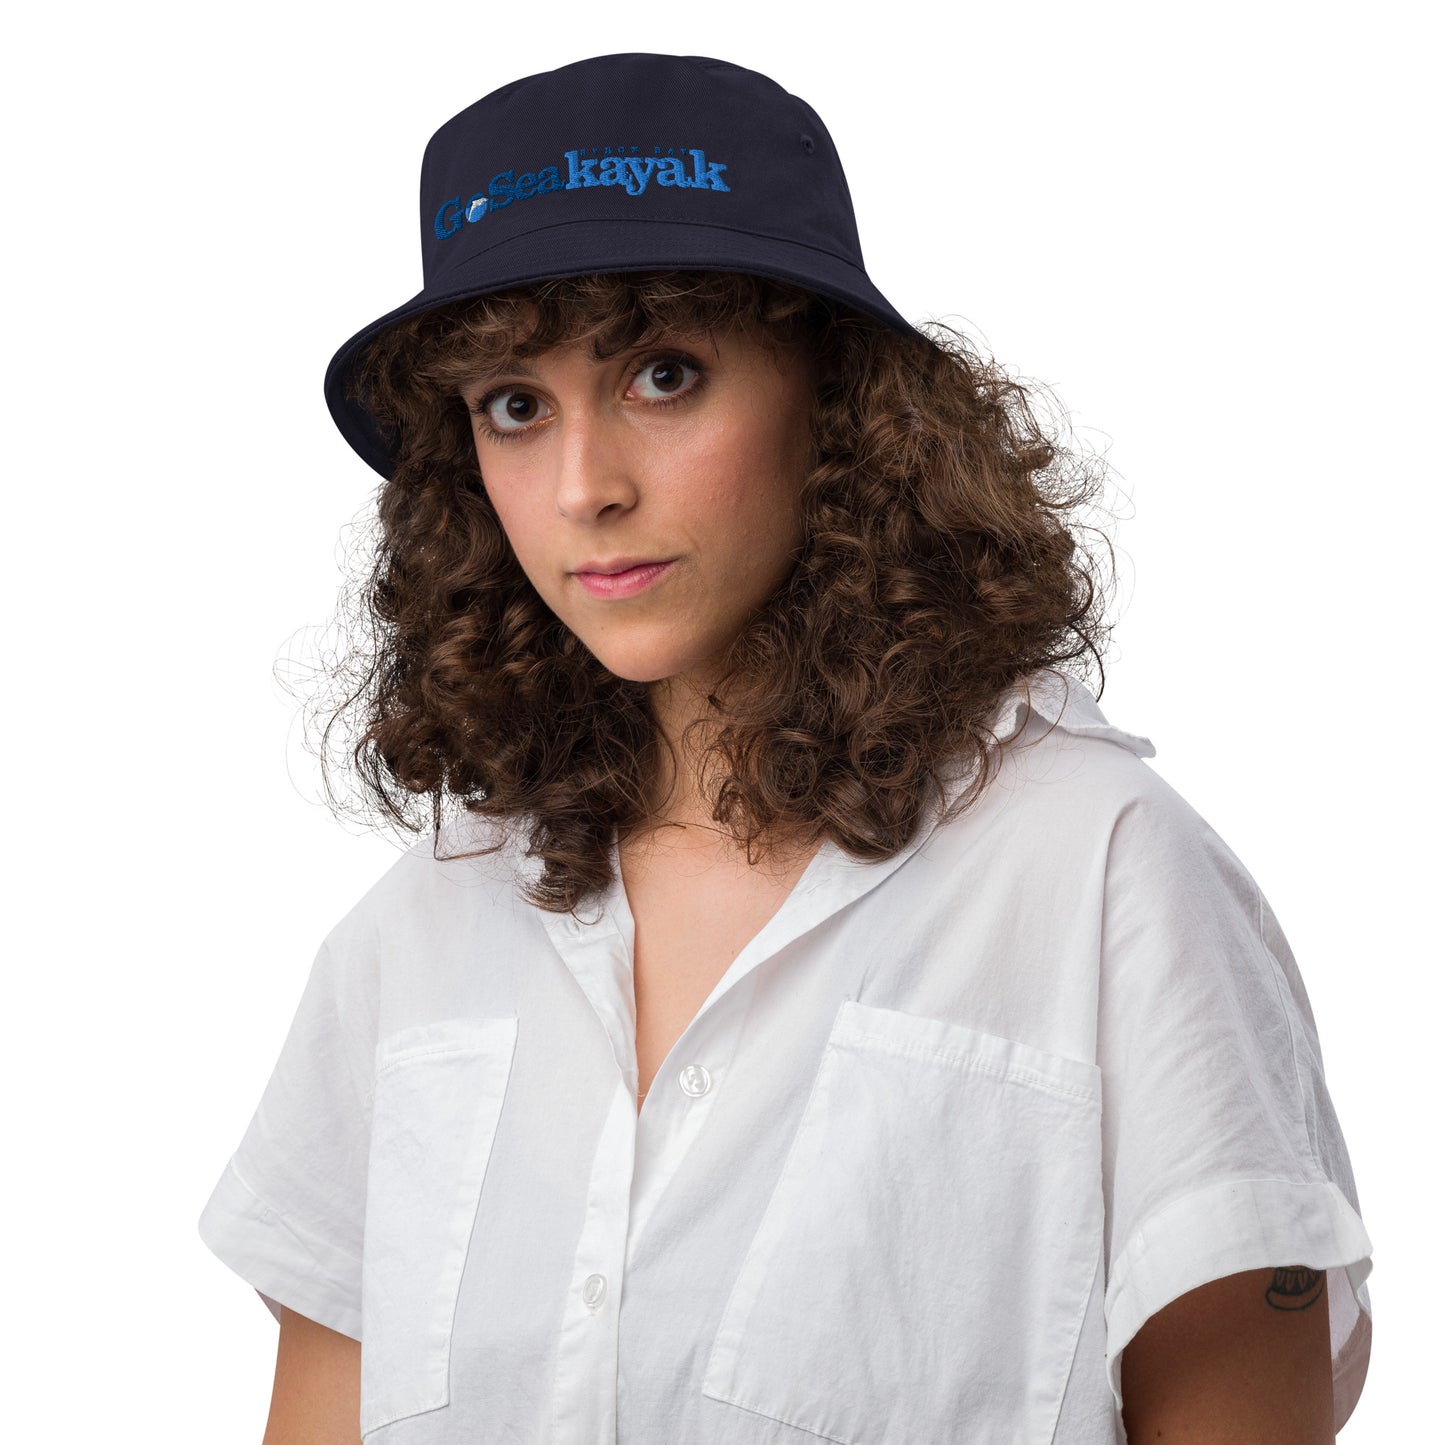  Unisex Bucket Hat - Navy - Front view on woman's head - Go Sea Kayak Byron Bay logo on front  - Genuine Byron Bay Merchandise | Produced by Go Sea Kayak Byron Bay